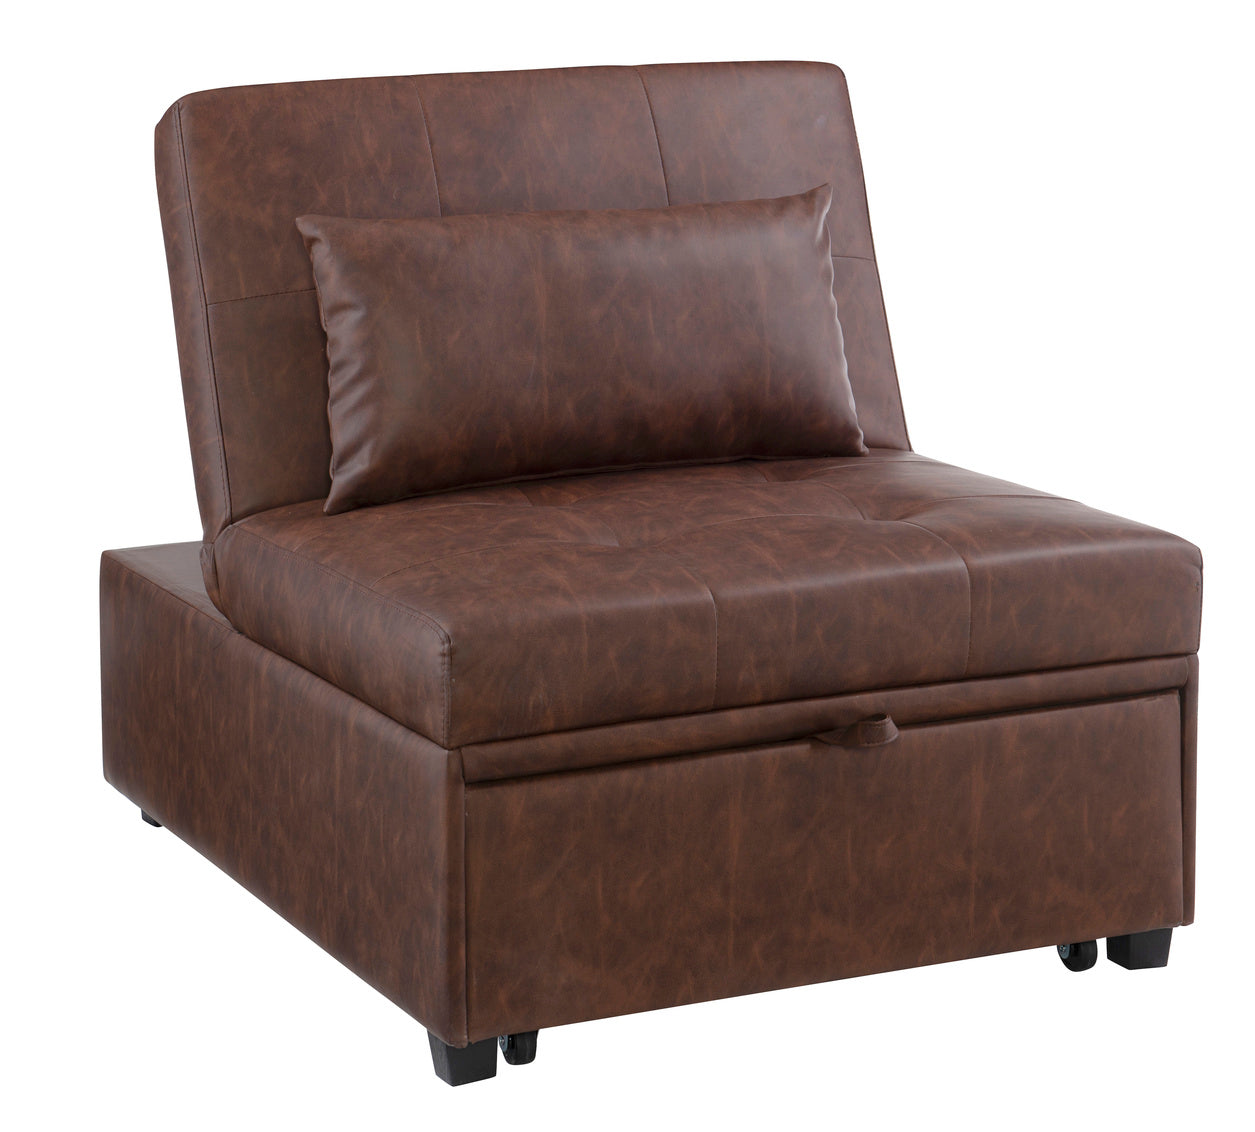 WEEKLY or MONTHLY. Dozer Brown Sofa Bed or Armless Chair